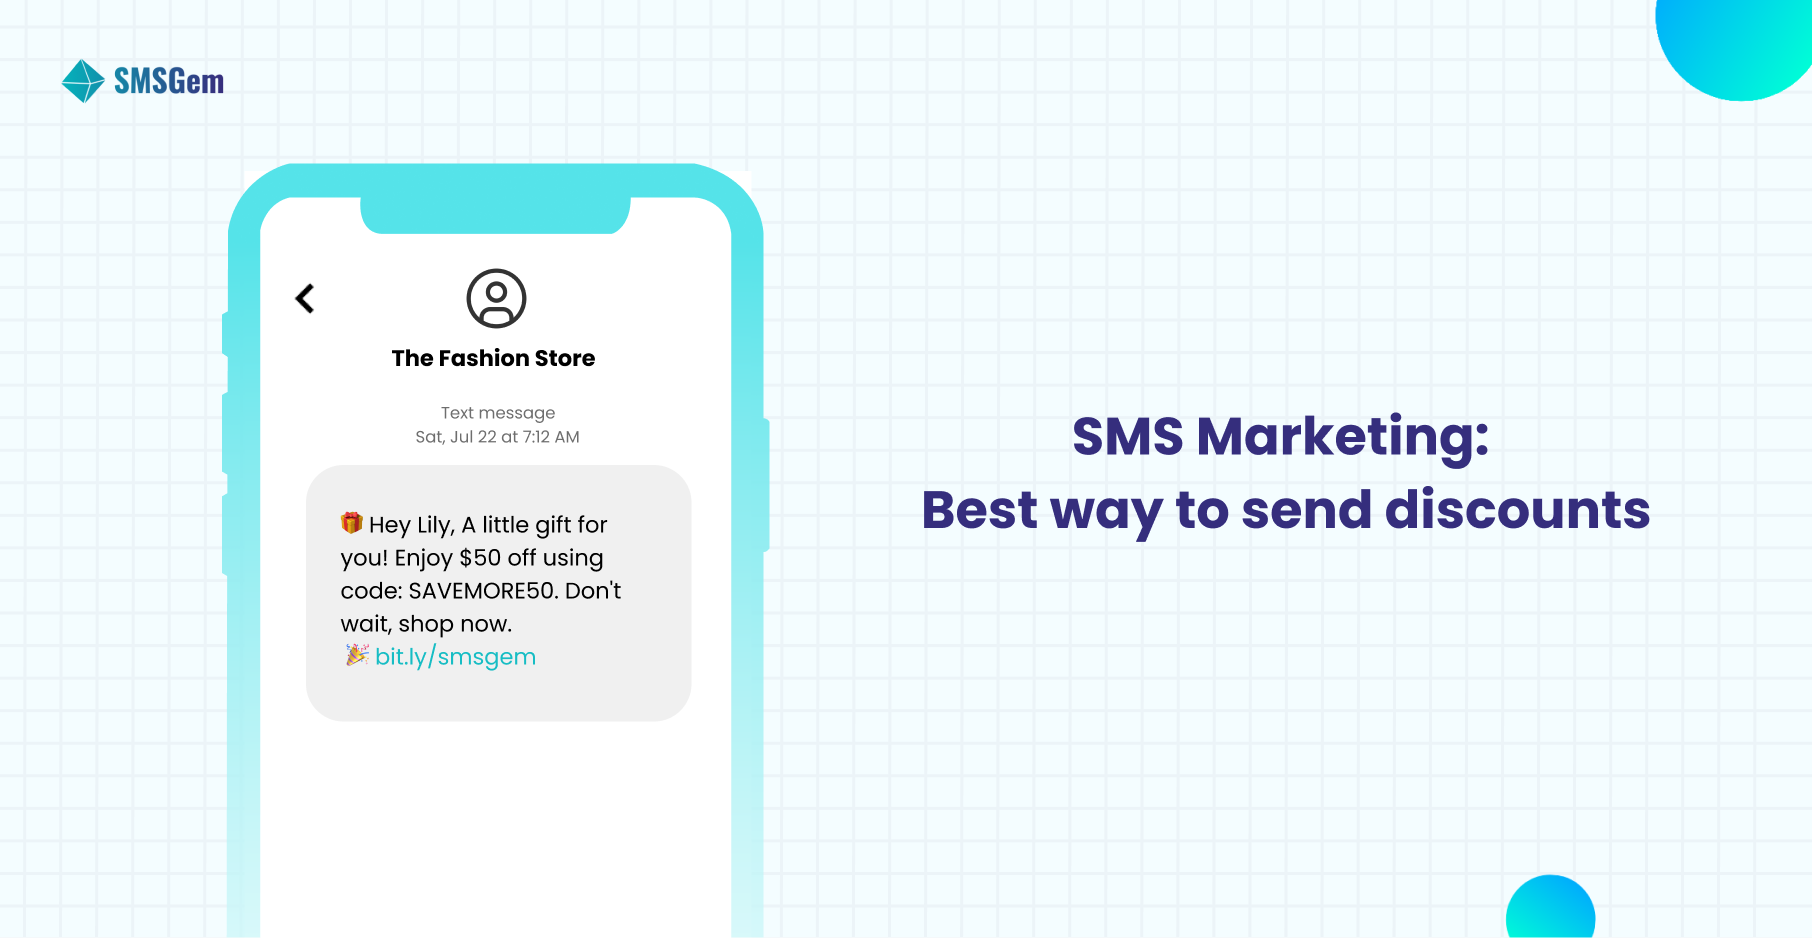 SMS Marketing is the best way to send discounts